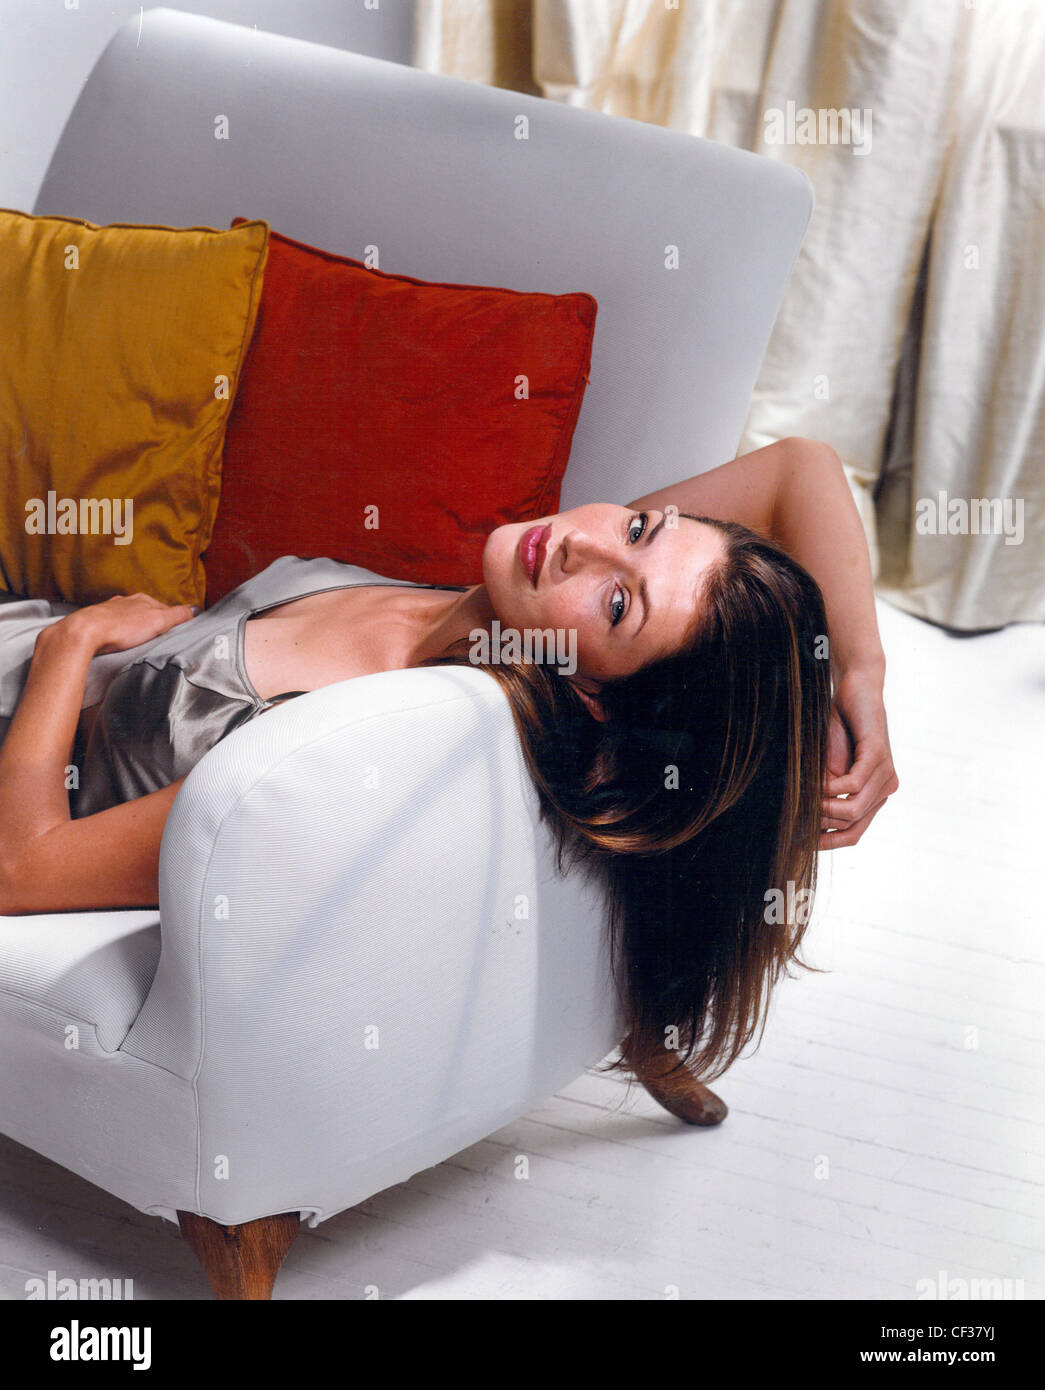 Female lying on armchair hair hanging over arm of chair Stock Photo